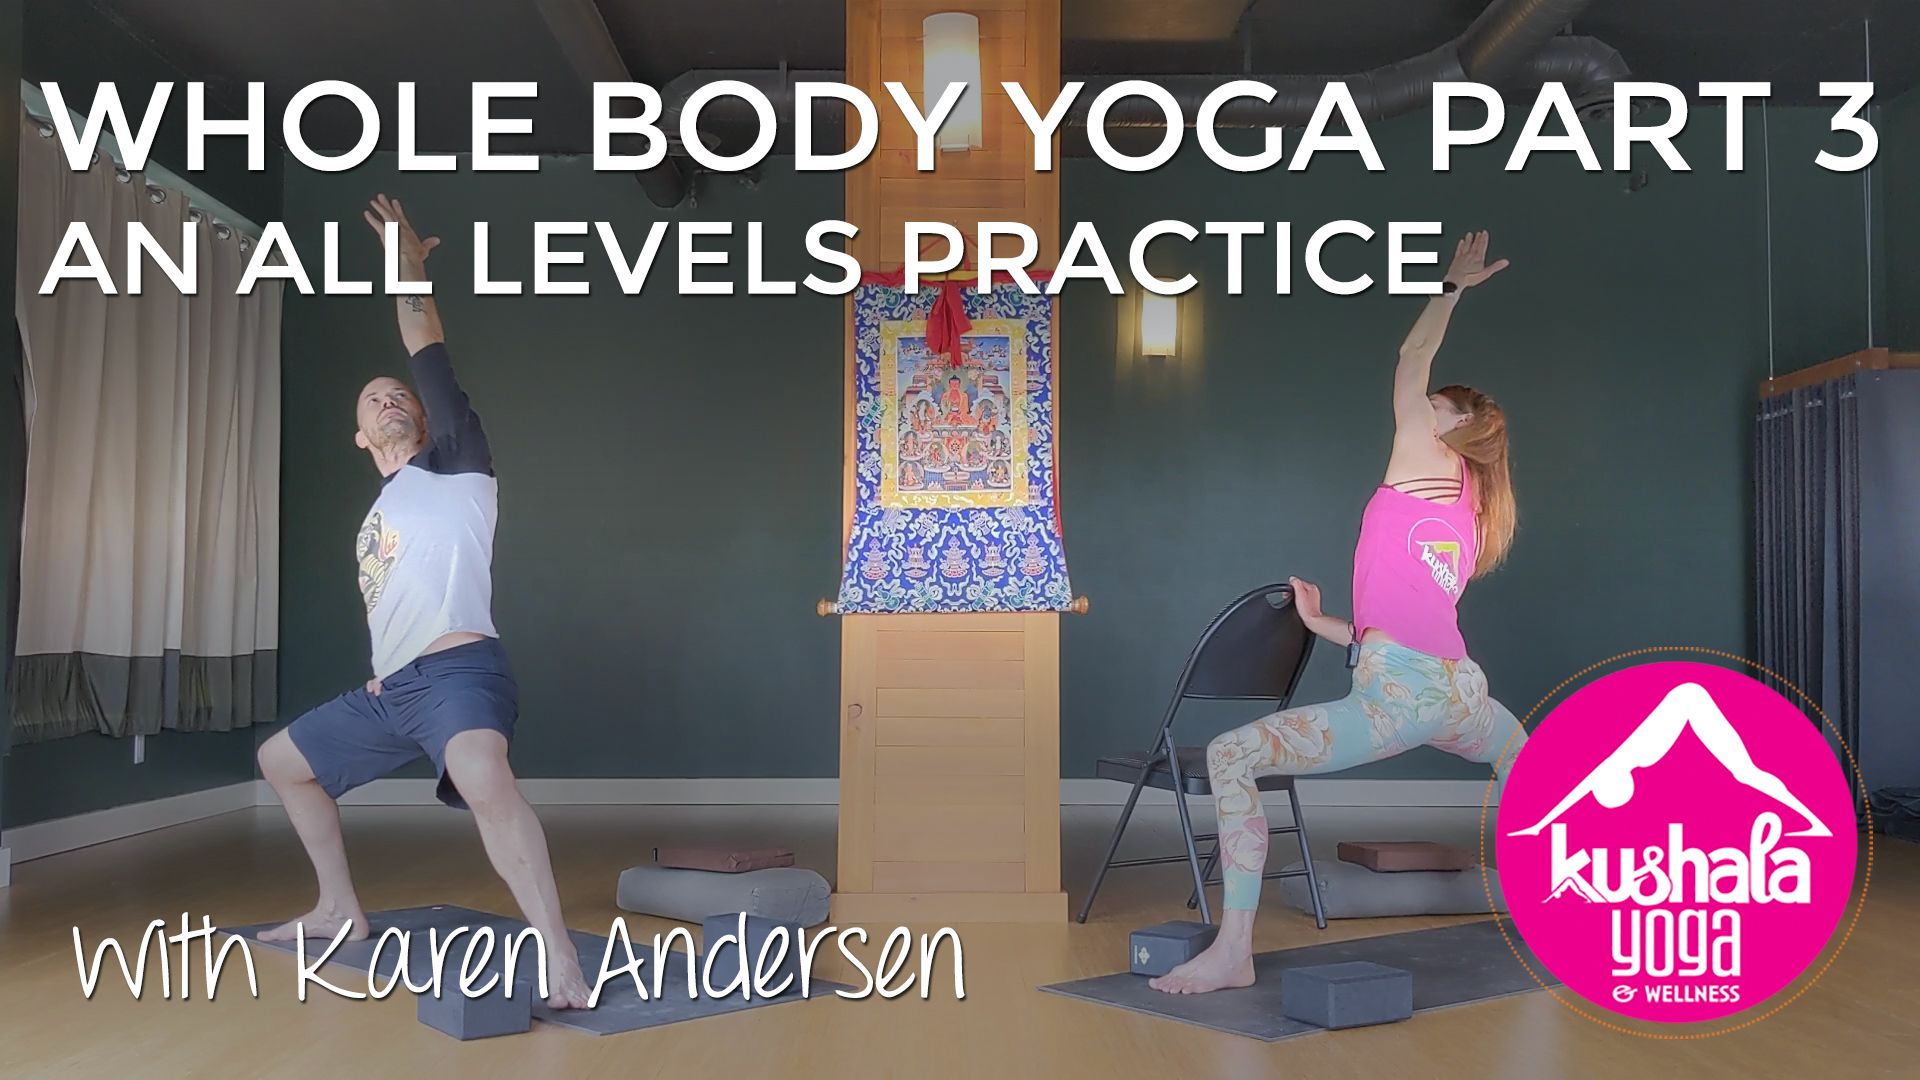 Foundational Flow #3 • Working to Headstand – Kushala Yoga and Wellness in  Port Moody